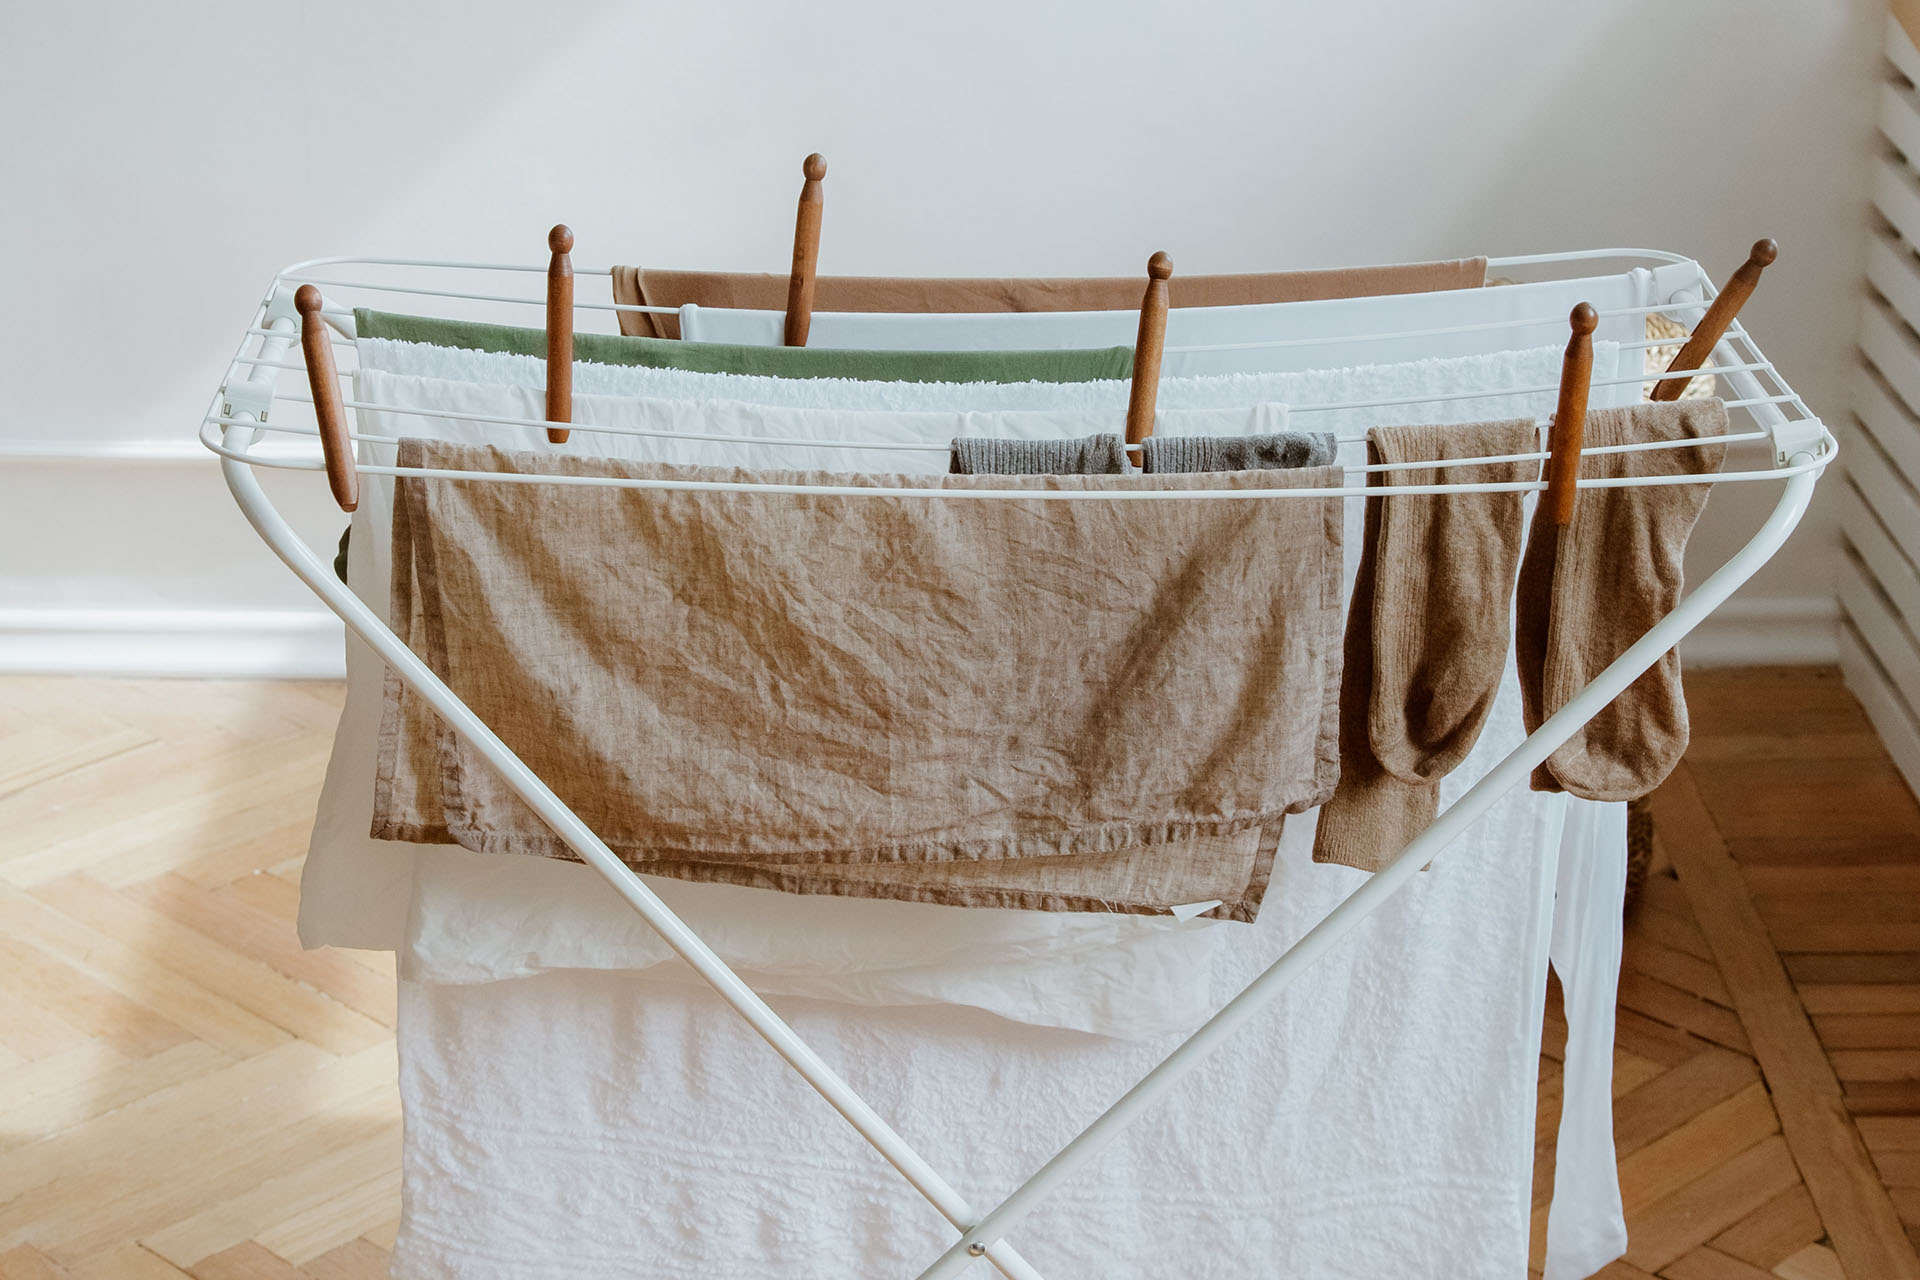 A white drying rack with light towels and white sheets and clothespins made of wood